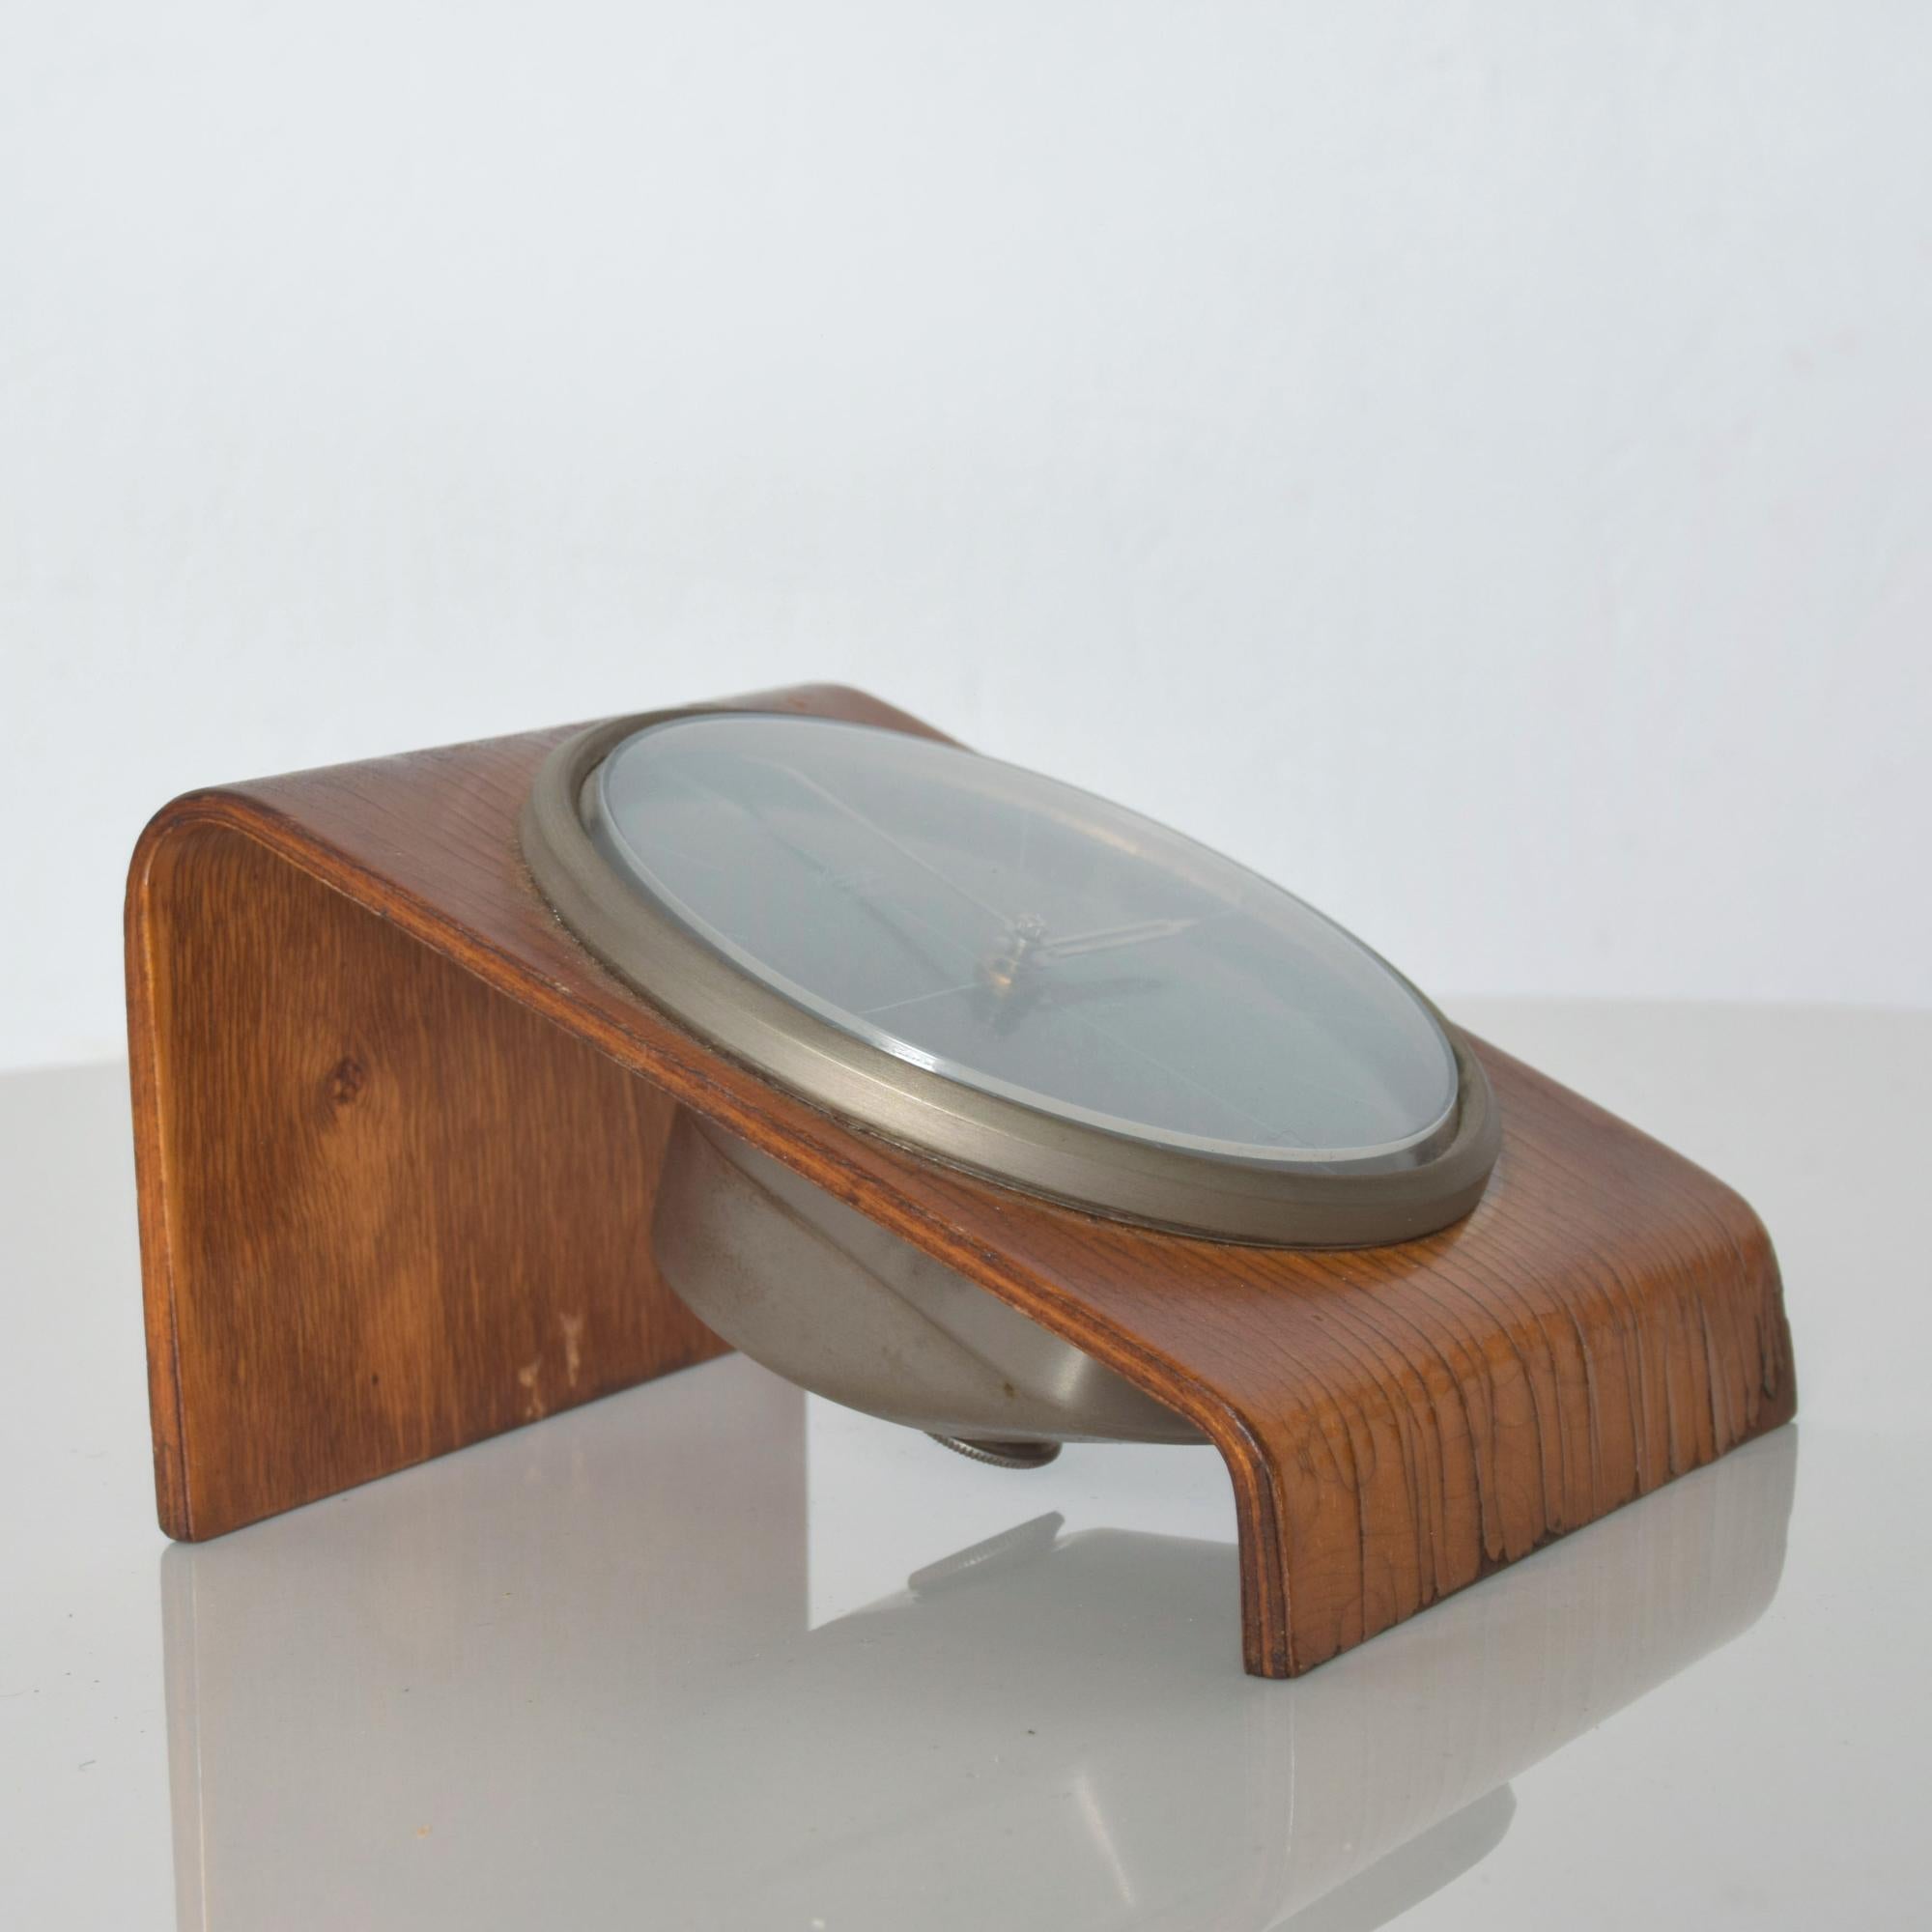 Desk Clock
Kienzle Modern Bentwood Desk Table Clock Brown & Silver made in Germany 1960s
Fabulous patinated waterfall effect on bentwood case also includes plexiglass and metal.
5D x 4.38 W x 3 H.
1960s Stylishly modern case electro-mechanical